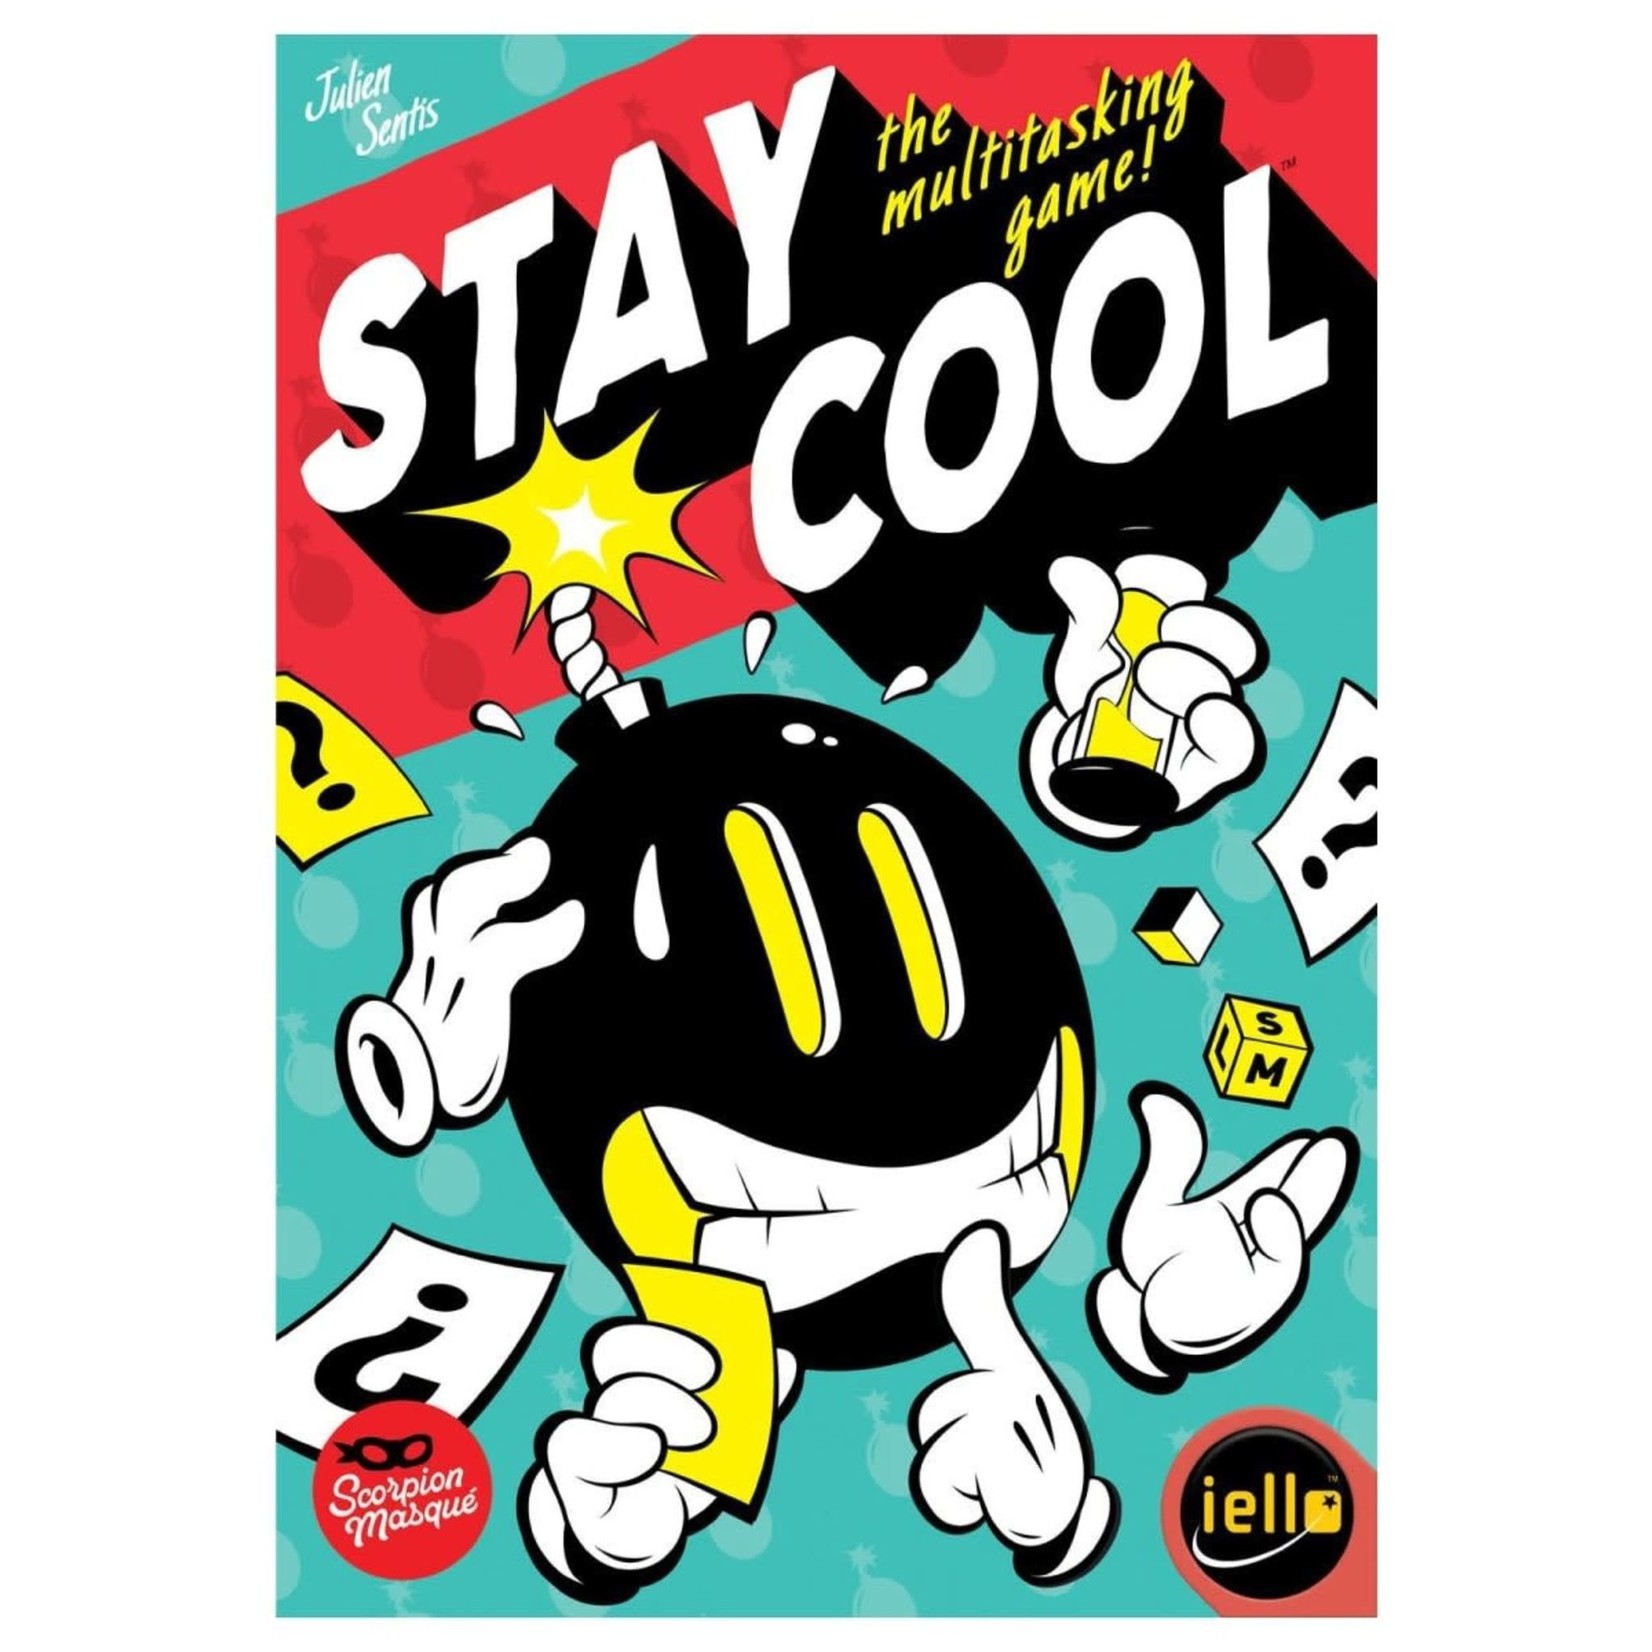 Stay Cool: The Multitasking Game